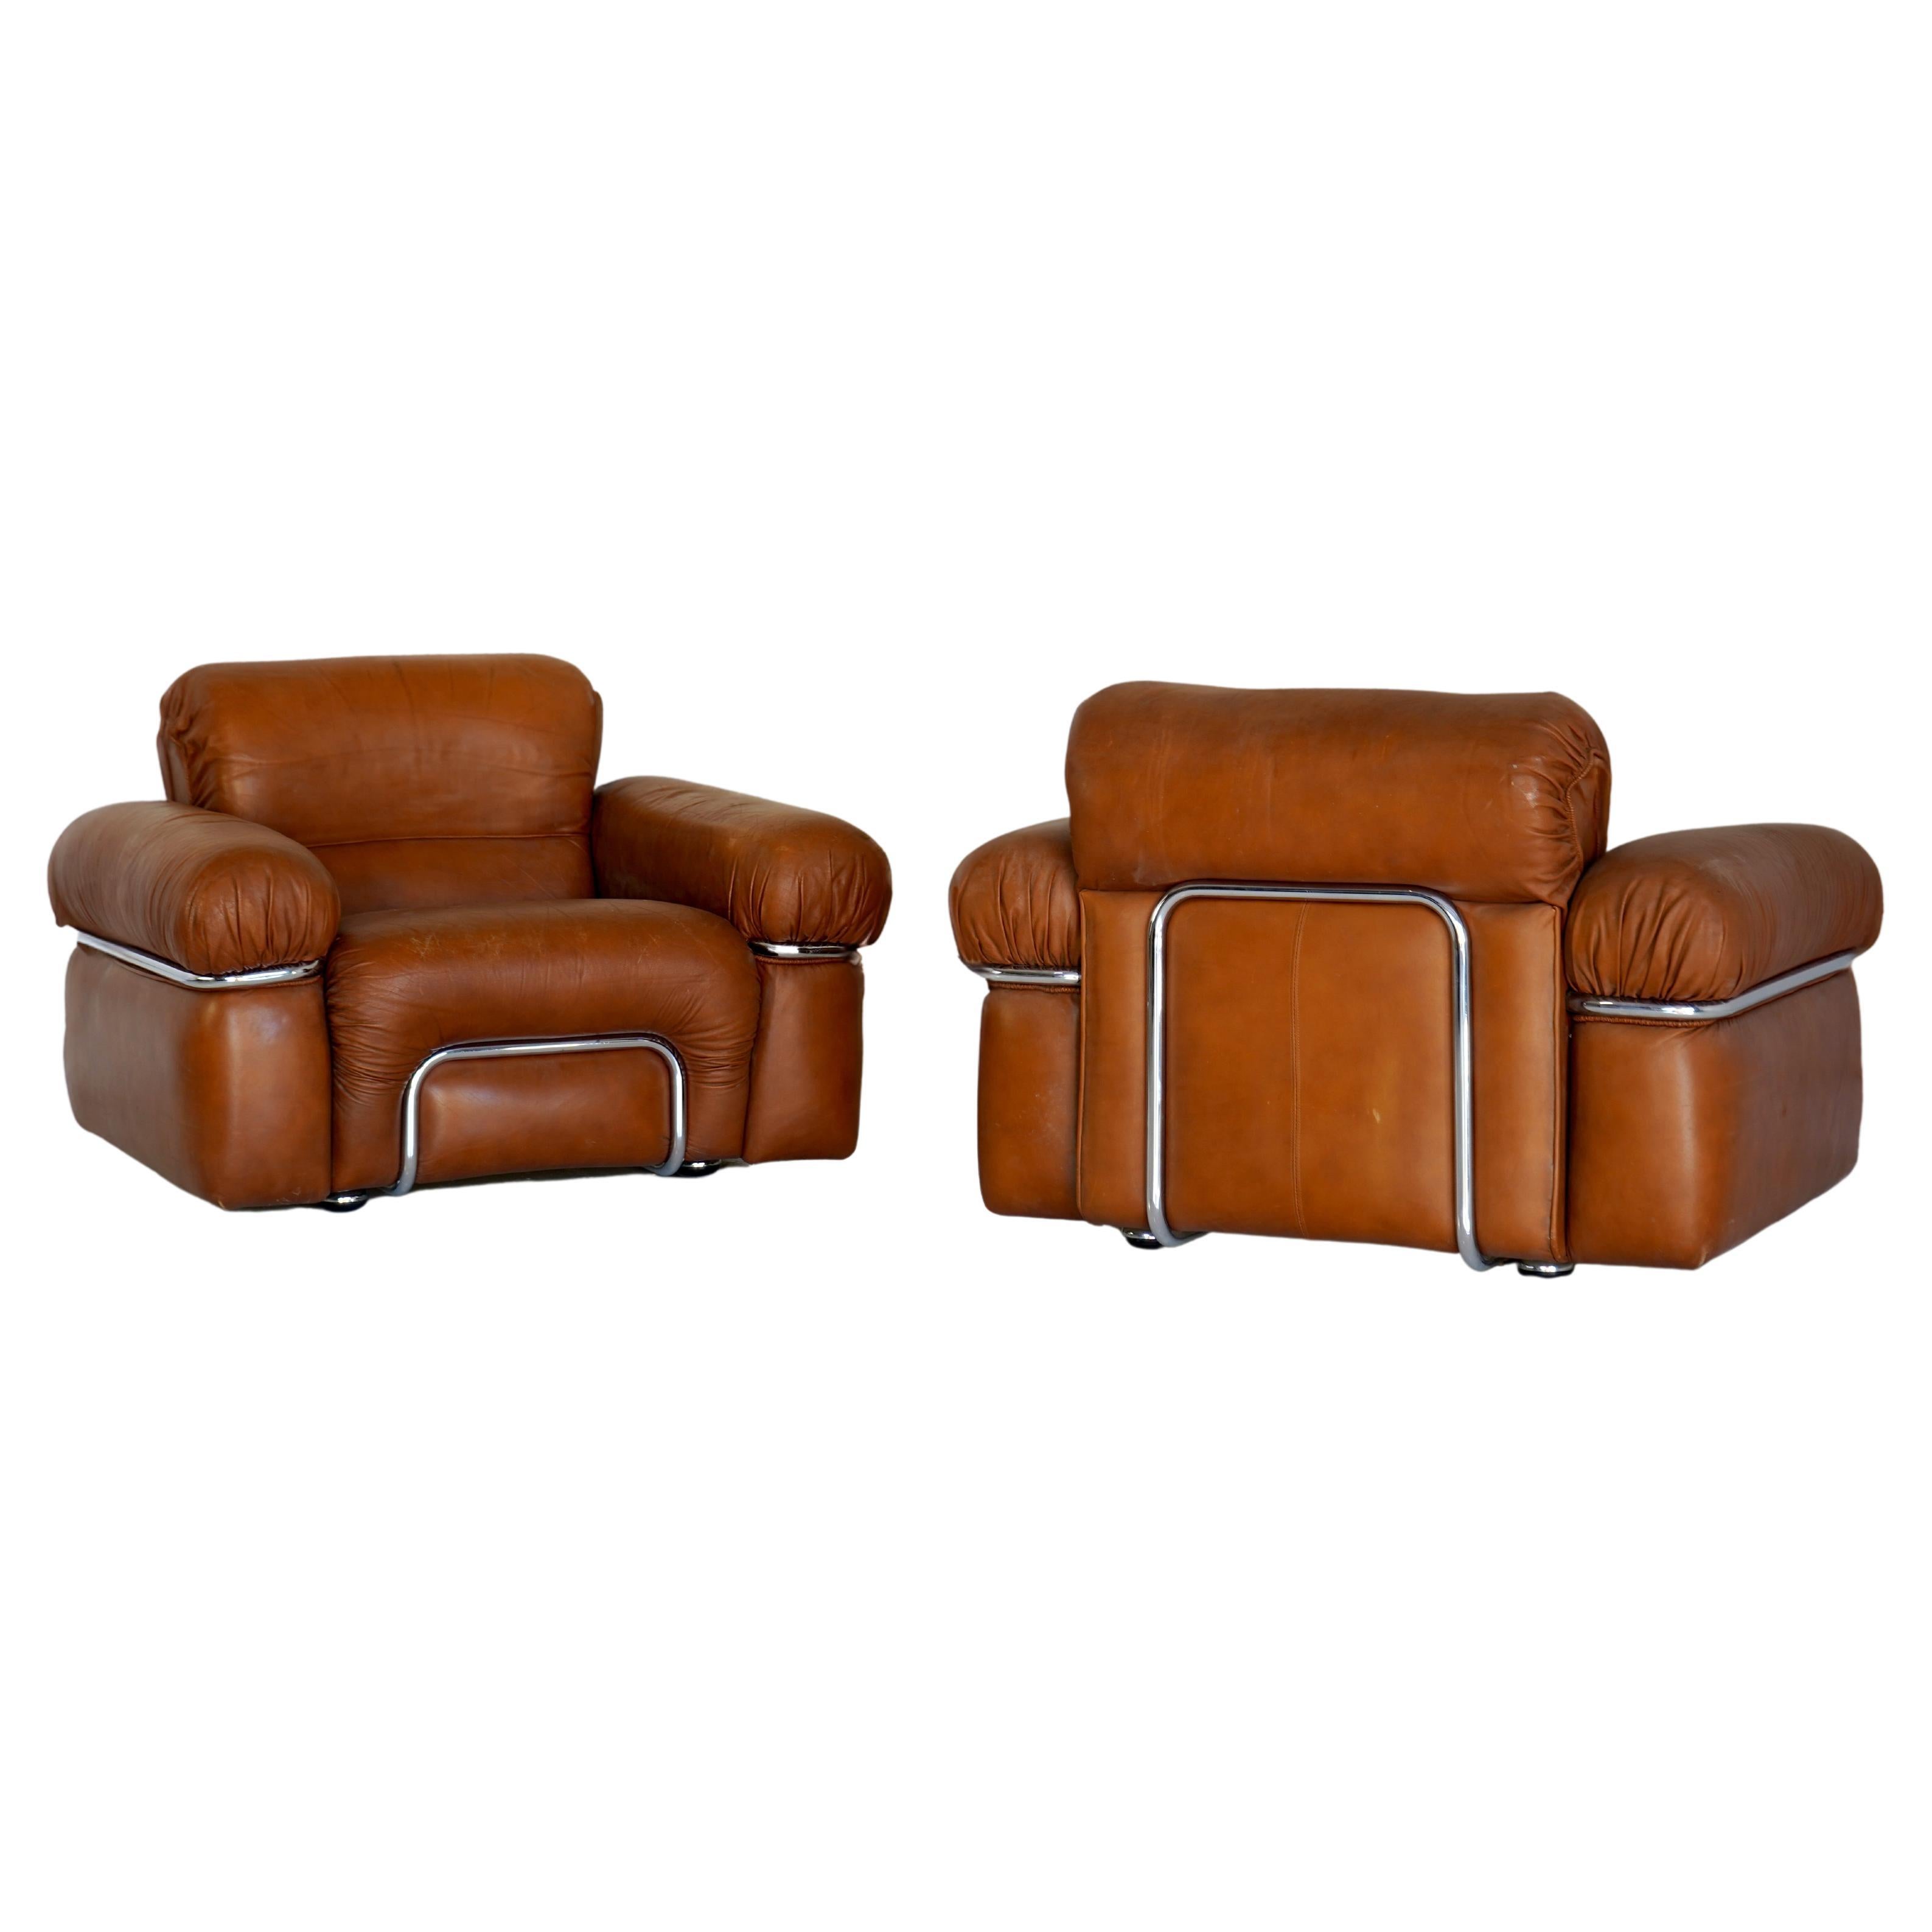 Italian Leather and Chrome Armchairs, Attributed to Adriano Piazzesi, Pair For Sale